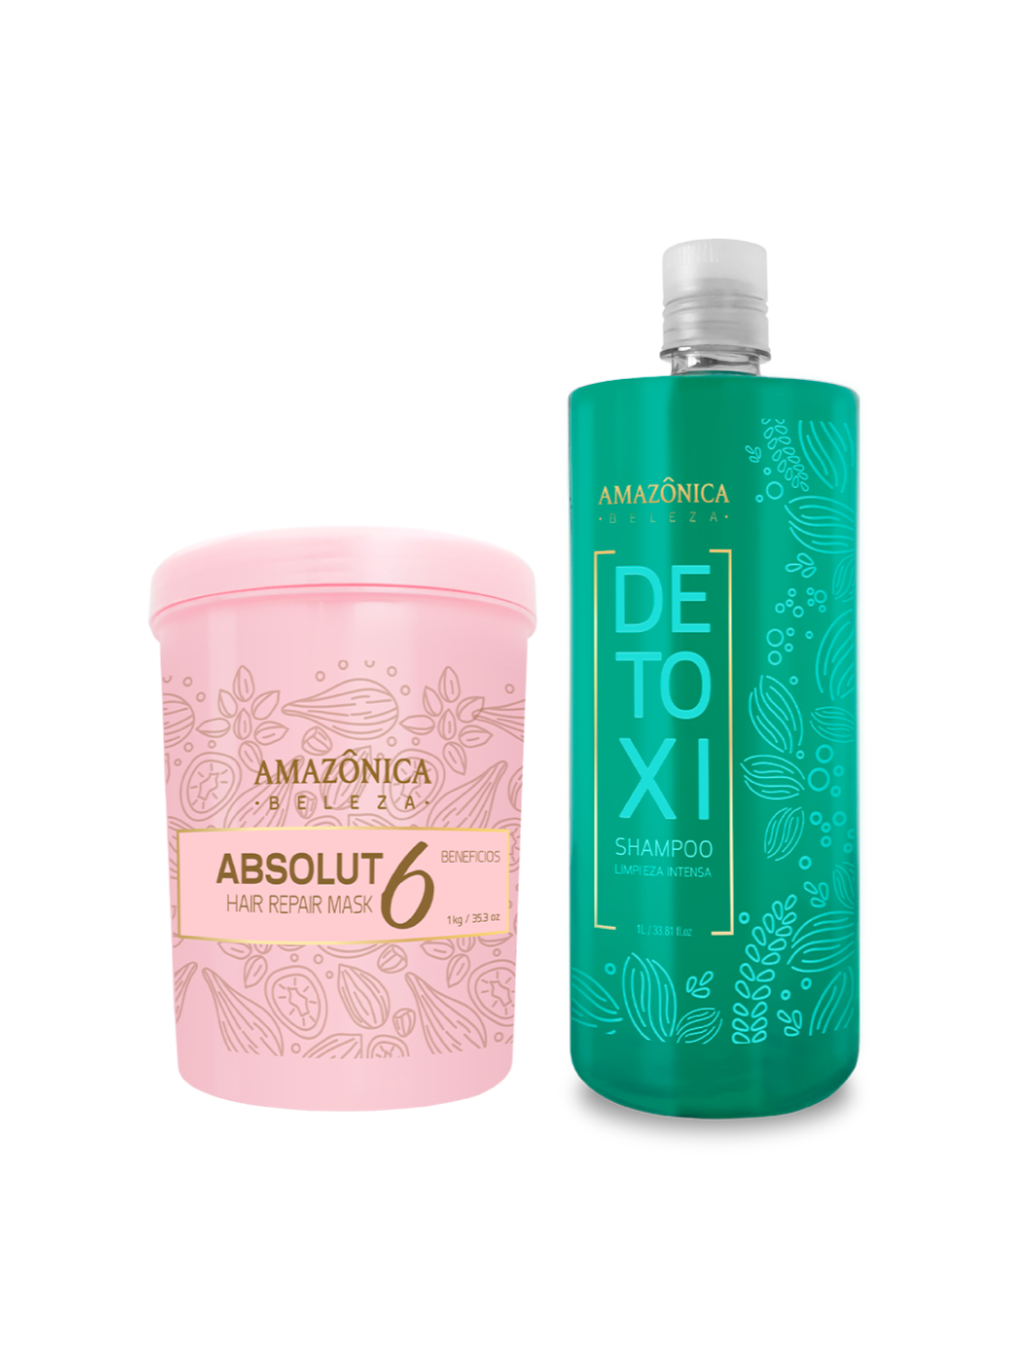 Professional Detox, Detox and Absolut Therapy